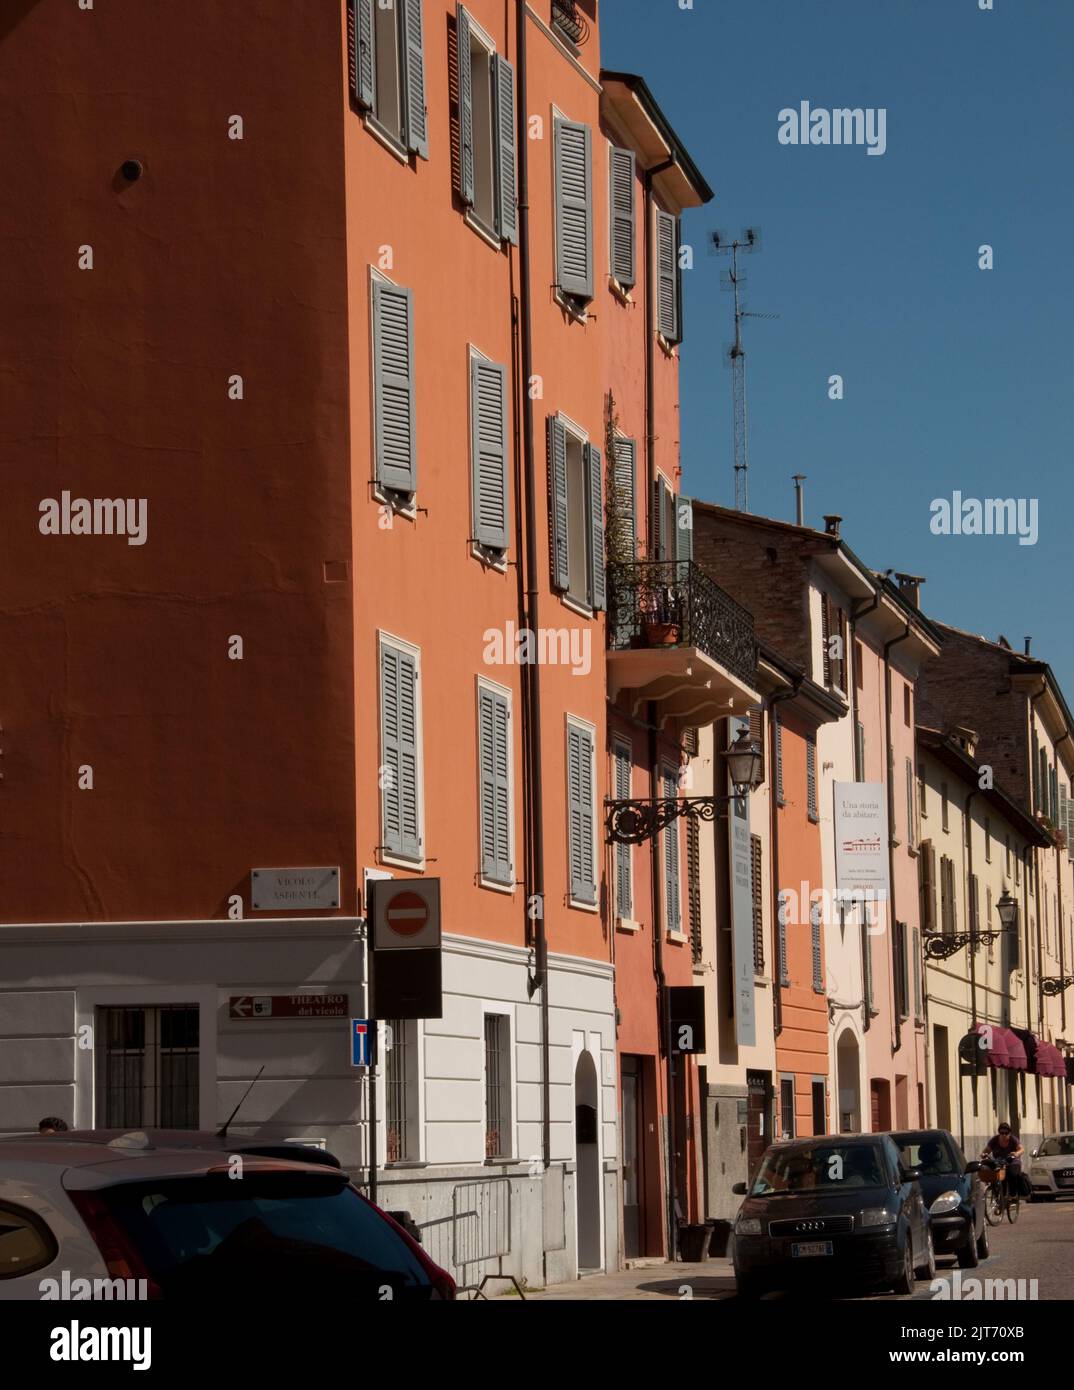 Street scene, Parma, Emiglia Romagna, Italy.  Houses painted in bright colours with shutters and balconies. Stock Photo